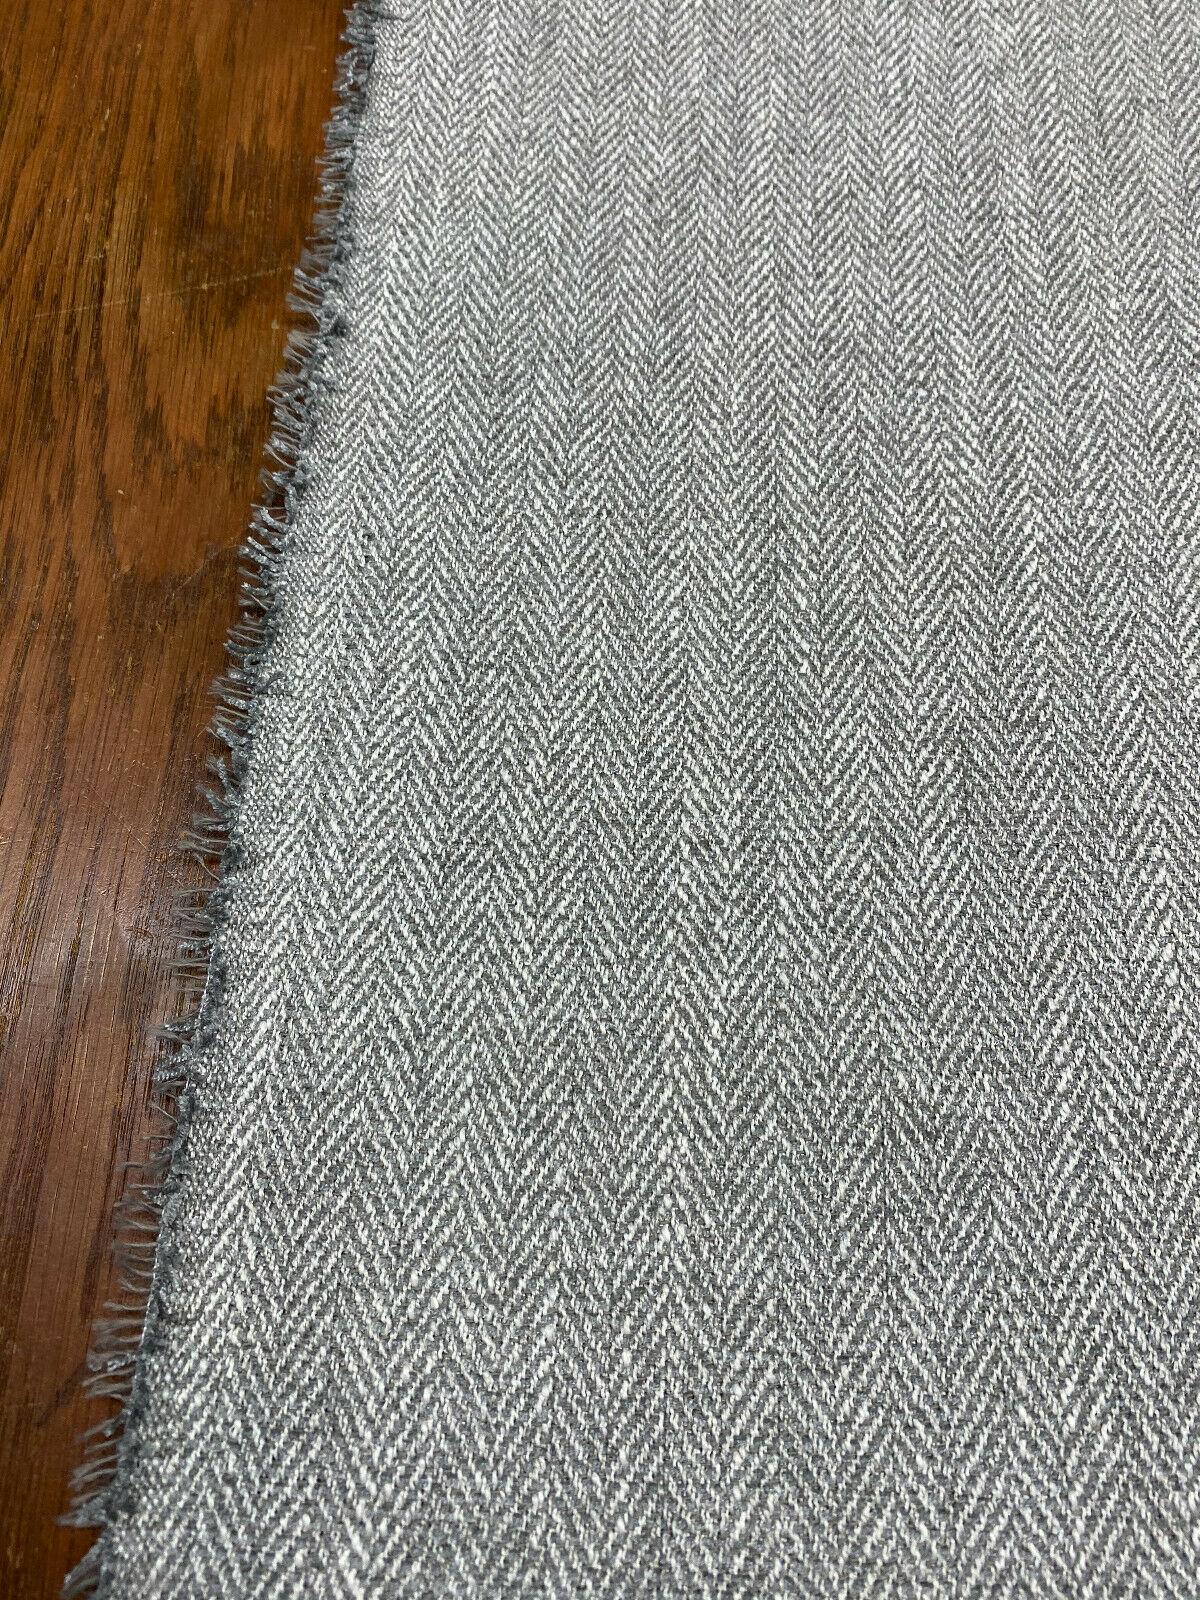 You are looking for an PK Upholstery Cust Stormy Blue Nanoclean Finish Chenille  Fabric by the yard p kaufmann to purchase? Be quick